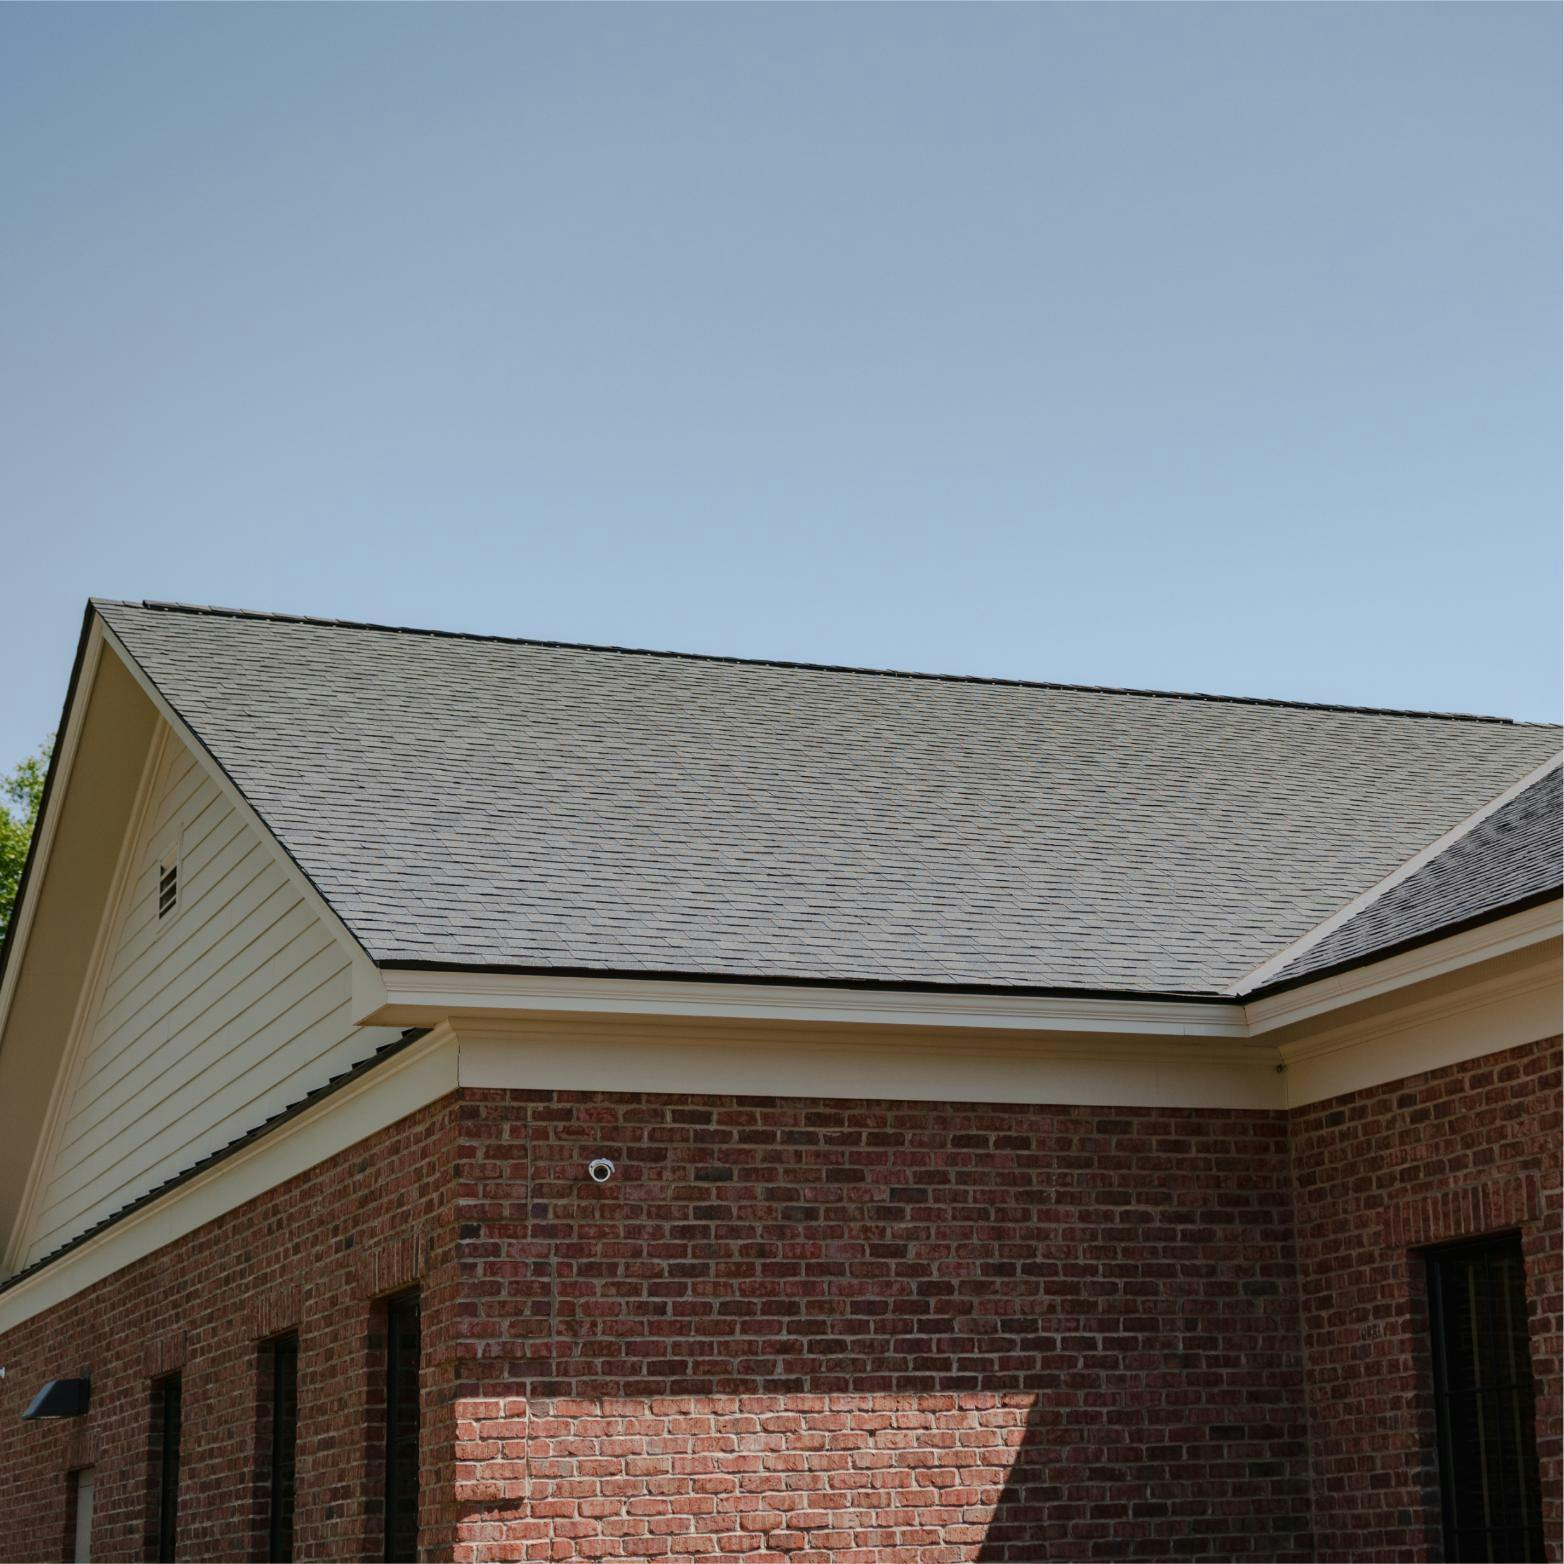 Durden Bank Millen, Georgia | Jenkins County Commercial Roofing | Commercial Roof Replacement | Architectural Asphalt Shingles